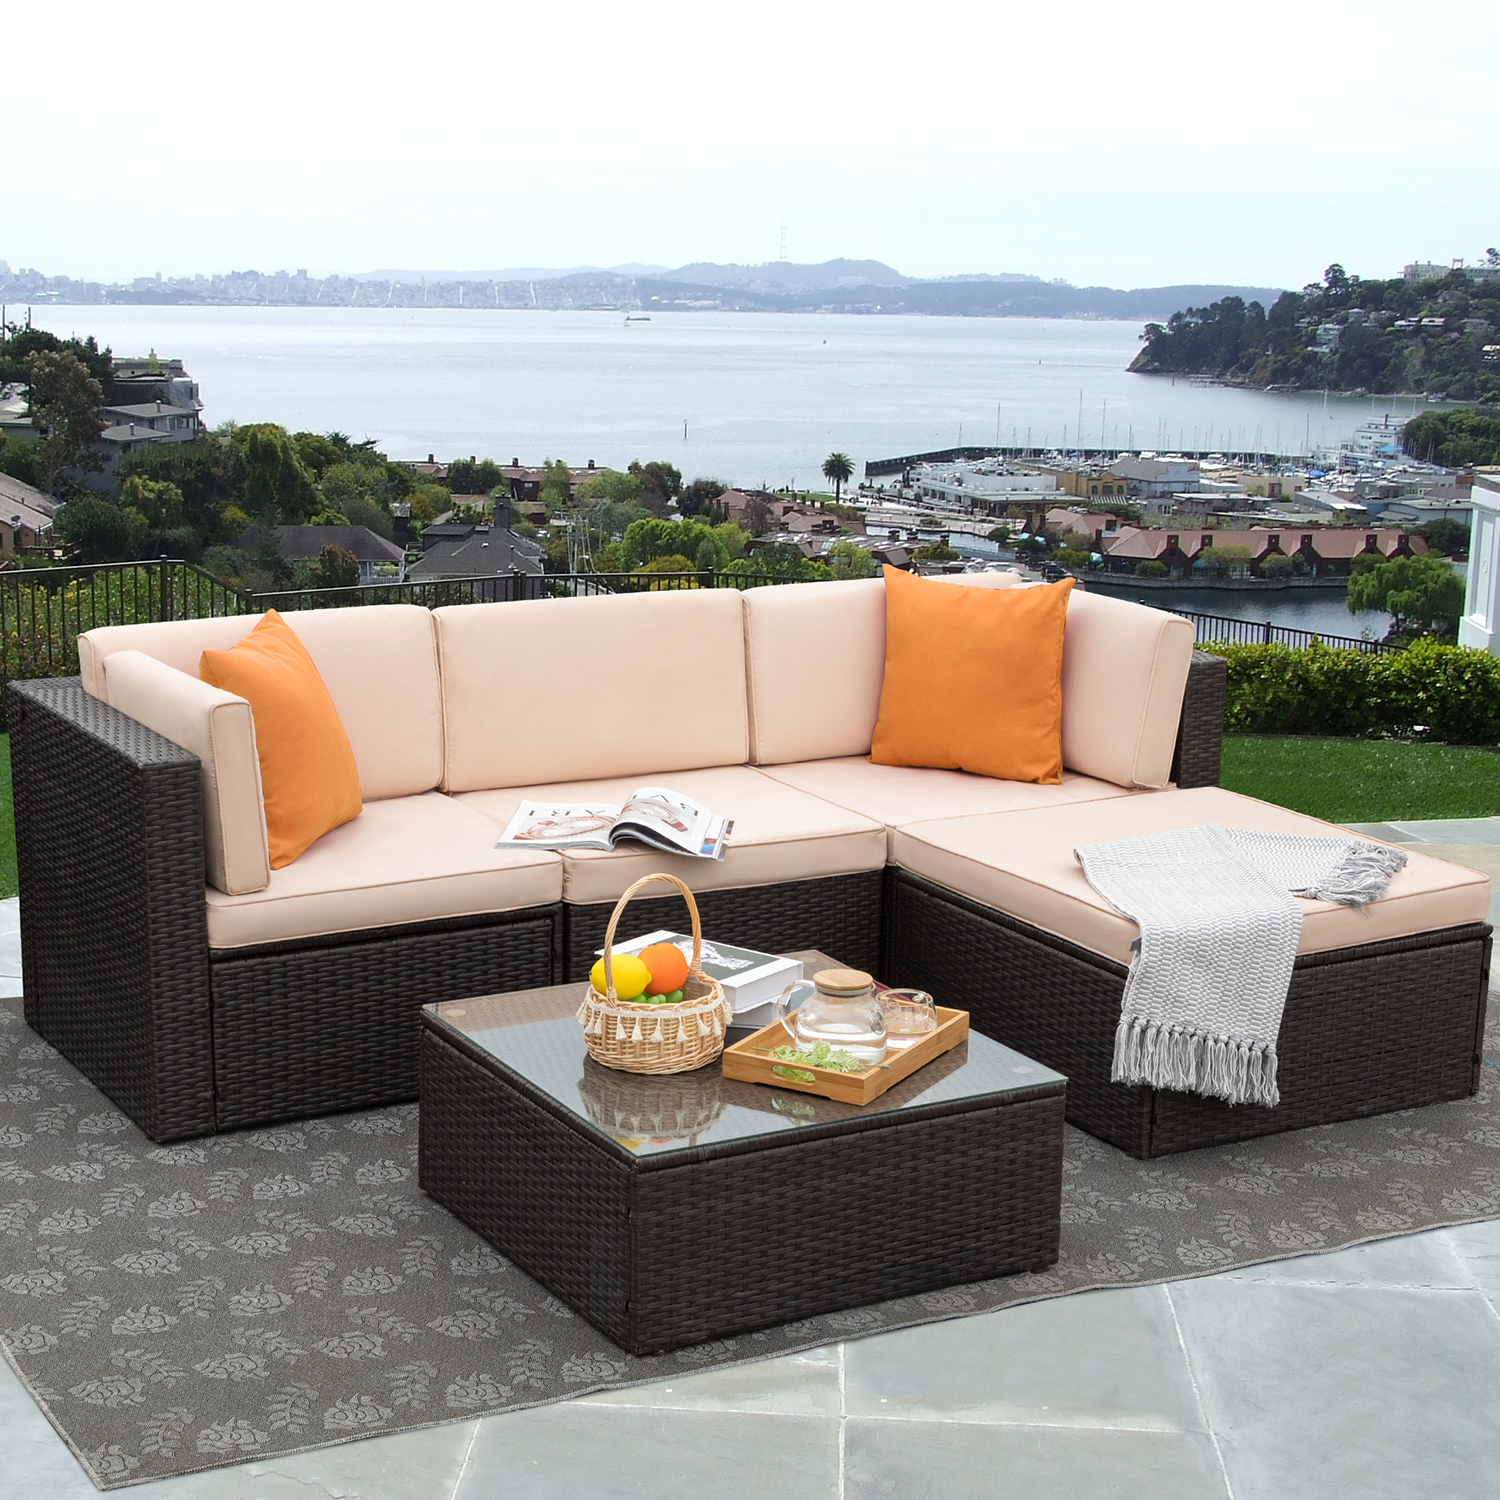 Lacoo 5 Pieces All-Weather Conversation Set and Glass Table Orange Pillow, Garden, 4, Rattan - image 1 of 7